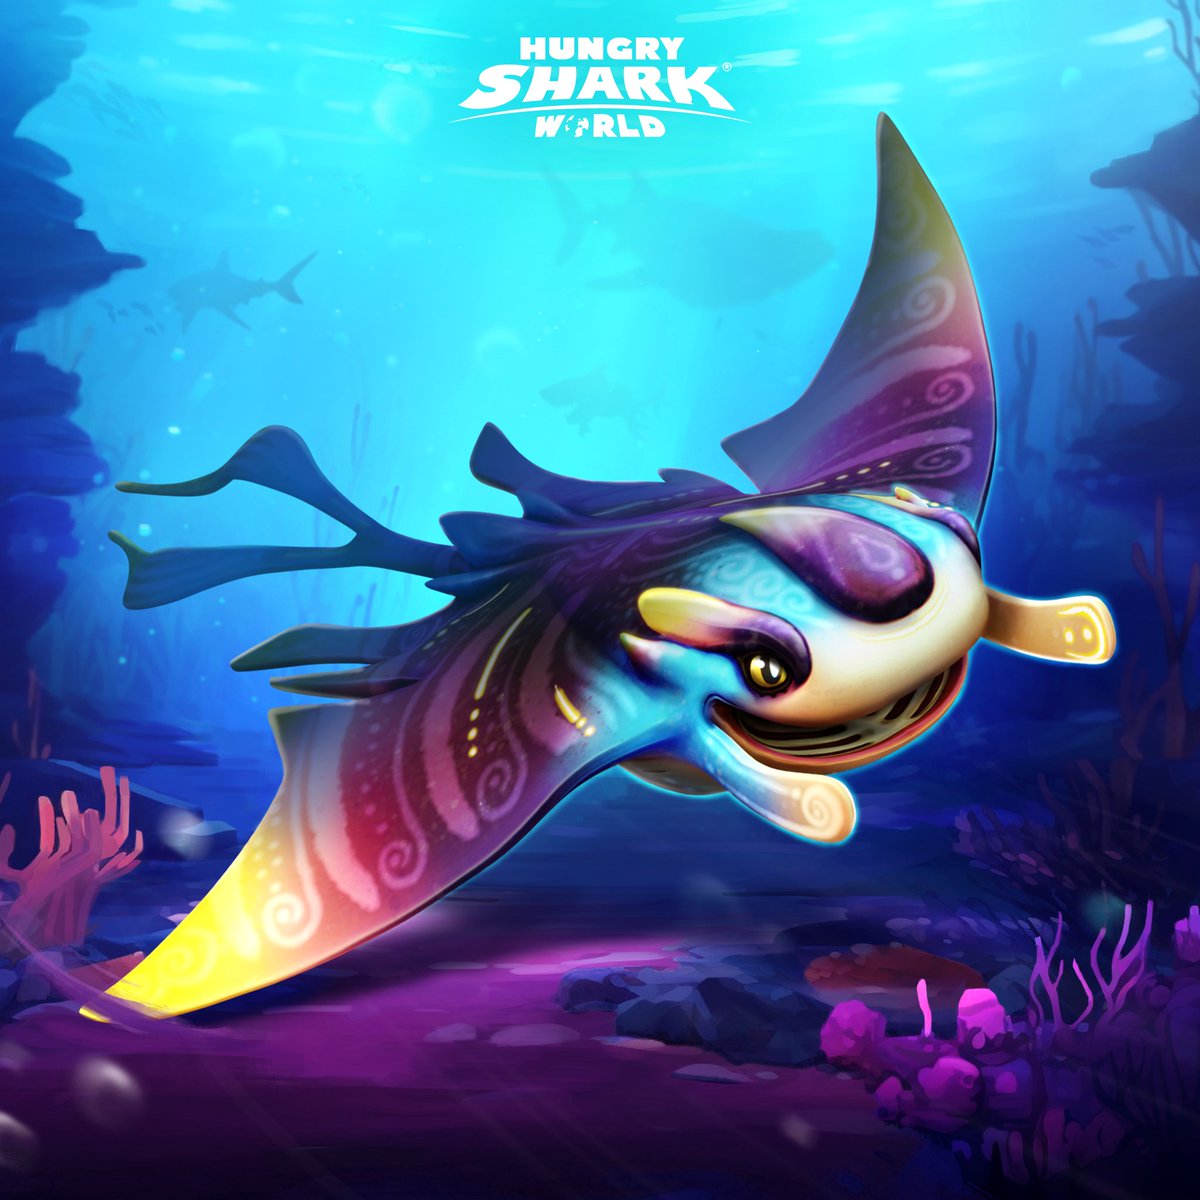 Feel the power of light with this blinding offer! ✨ Take the opportunity to get the magnificent Francis in #HungrySharkWorld at a reduced price! 🦈 #HSW